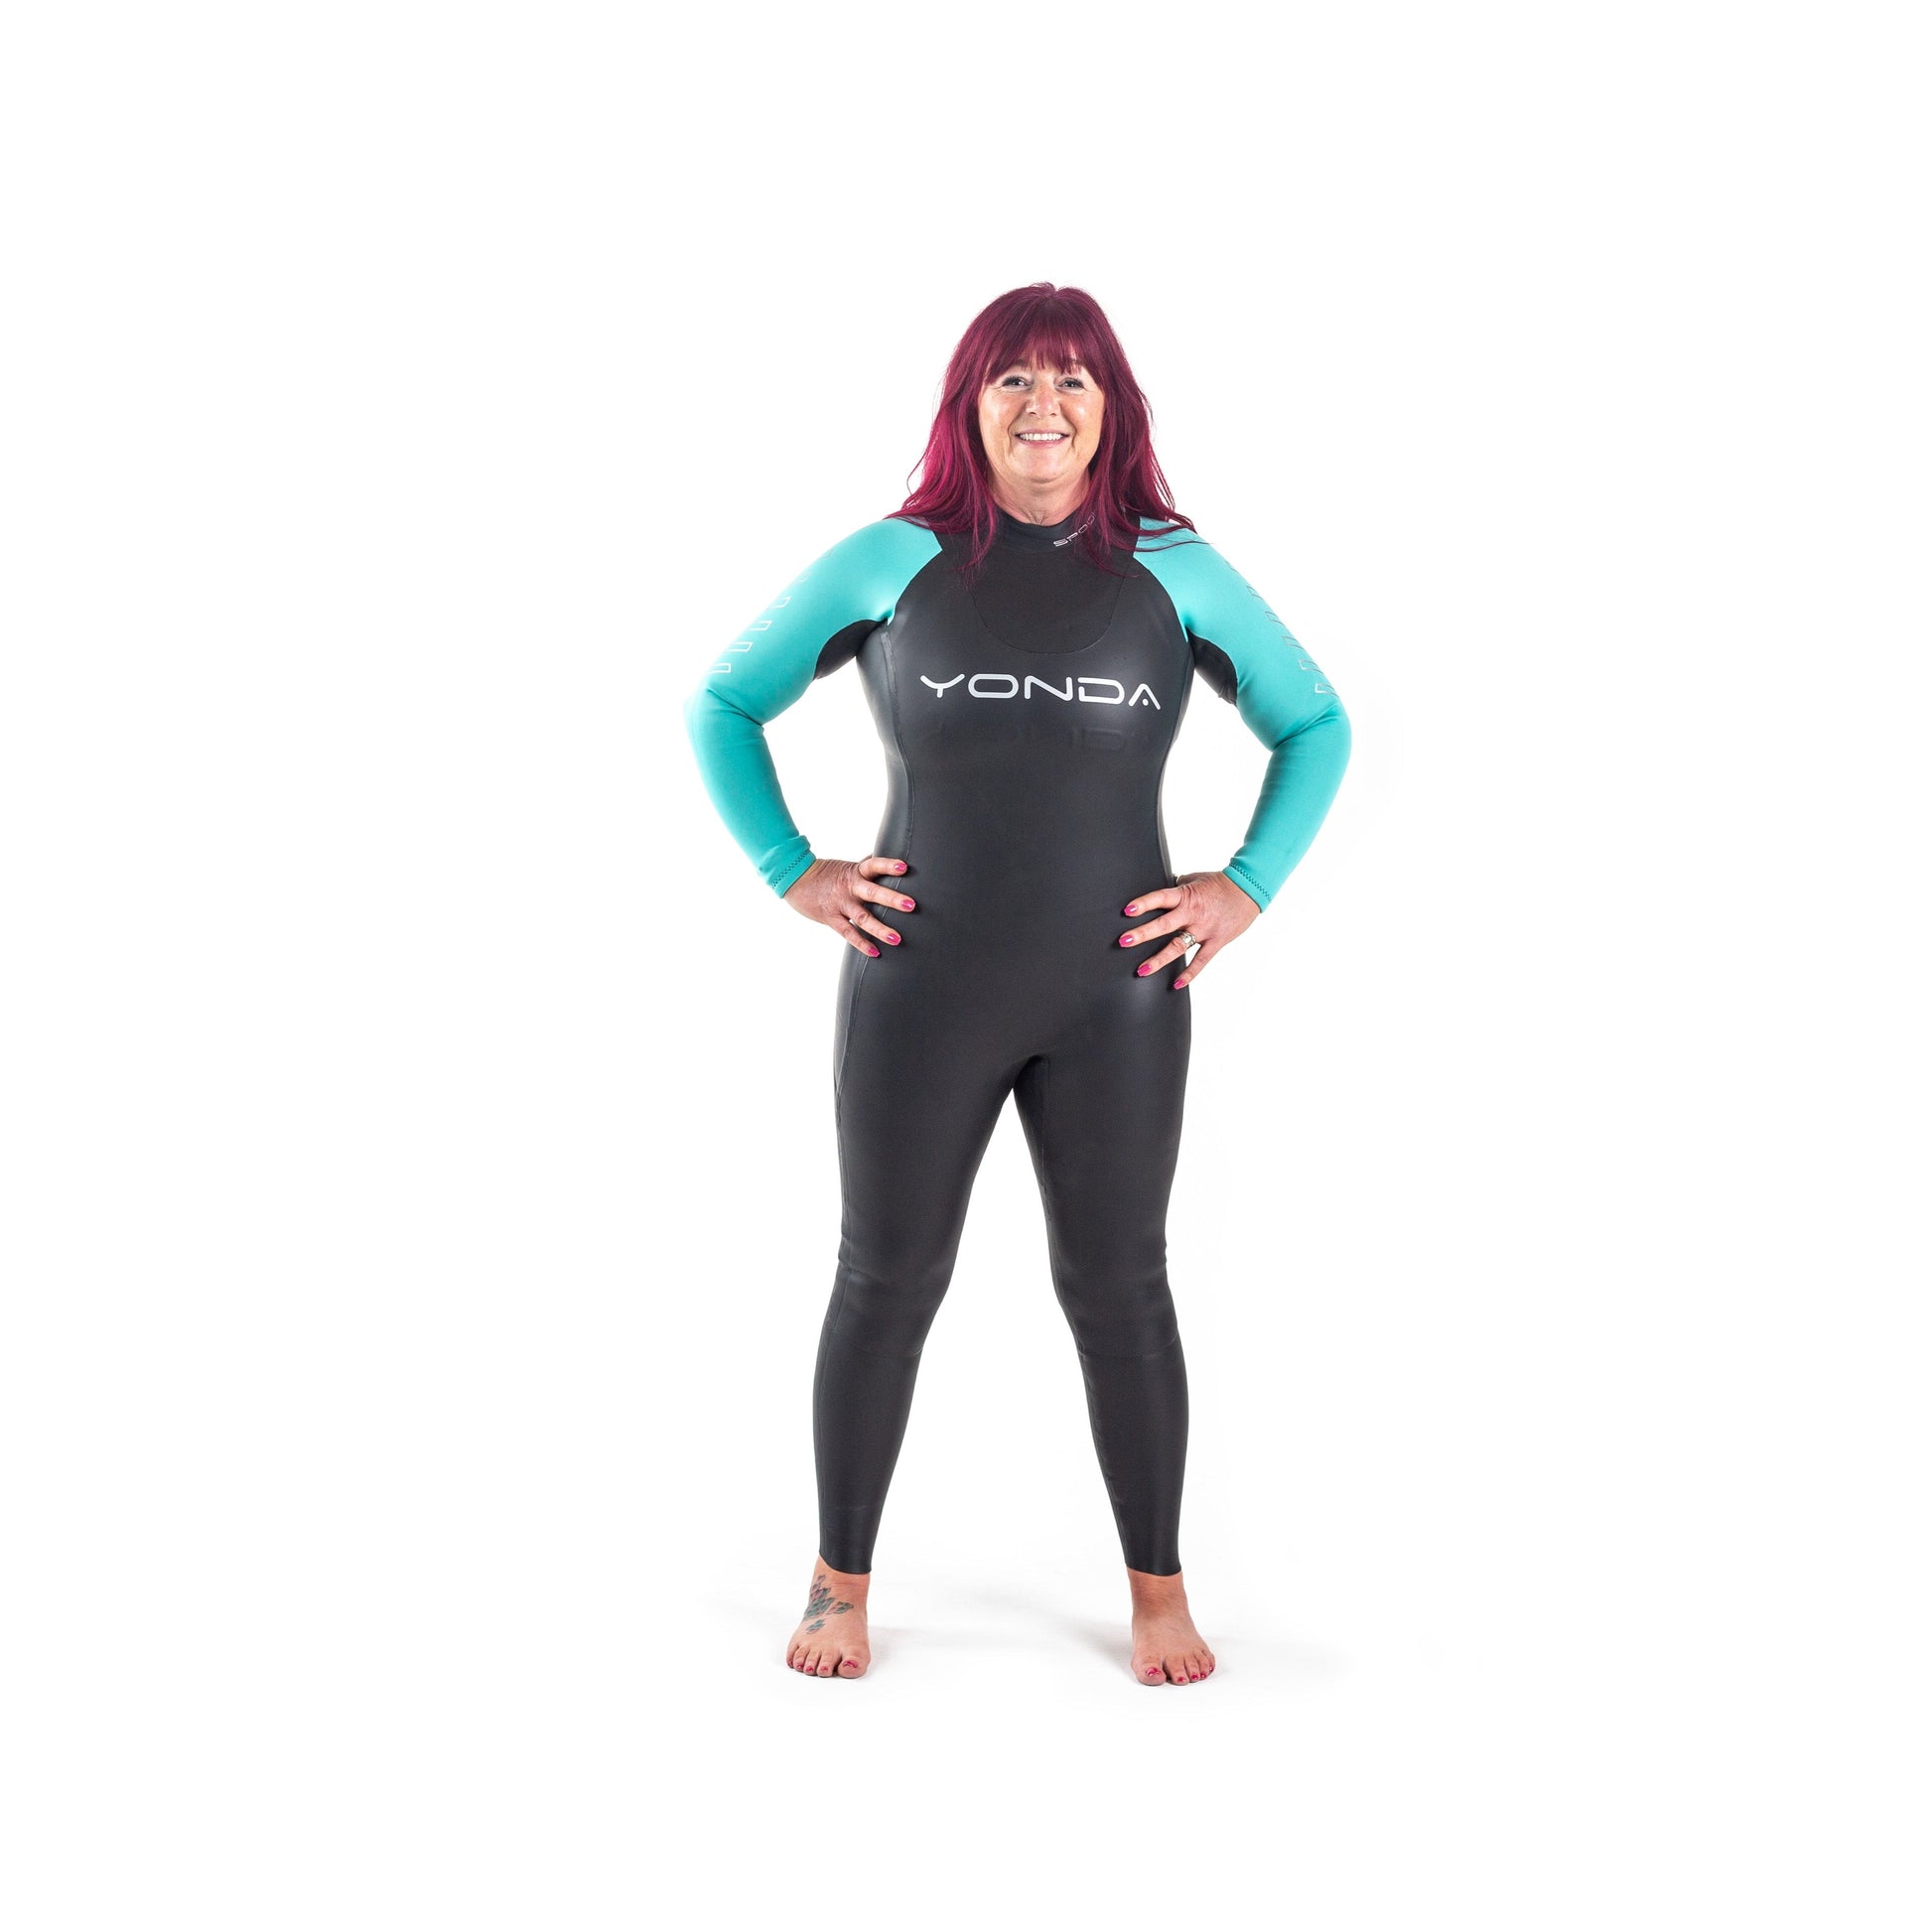 Front view of a women standing in a Spook Wetsuit by Yonda, with hands on hips. The Womens Wild Swimming Wetsuit is black with aqua arms.